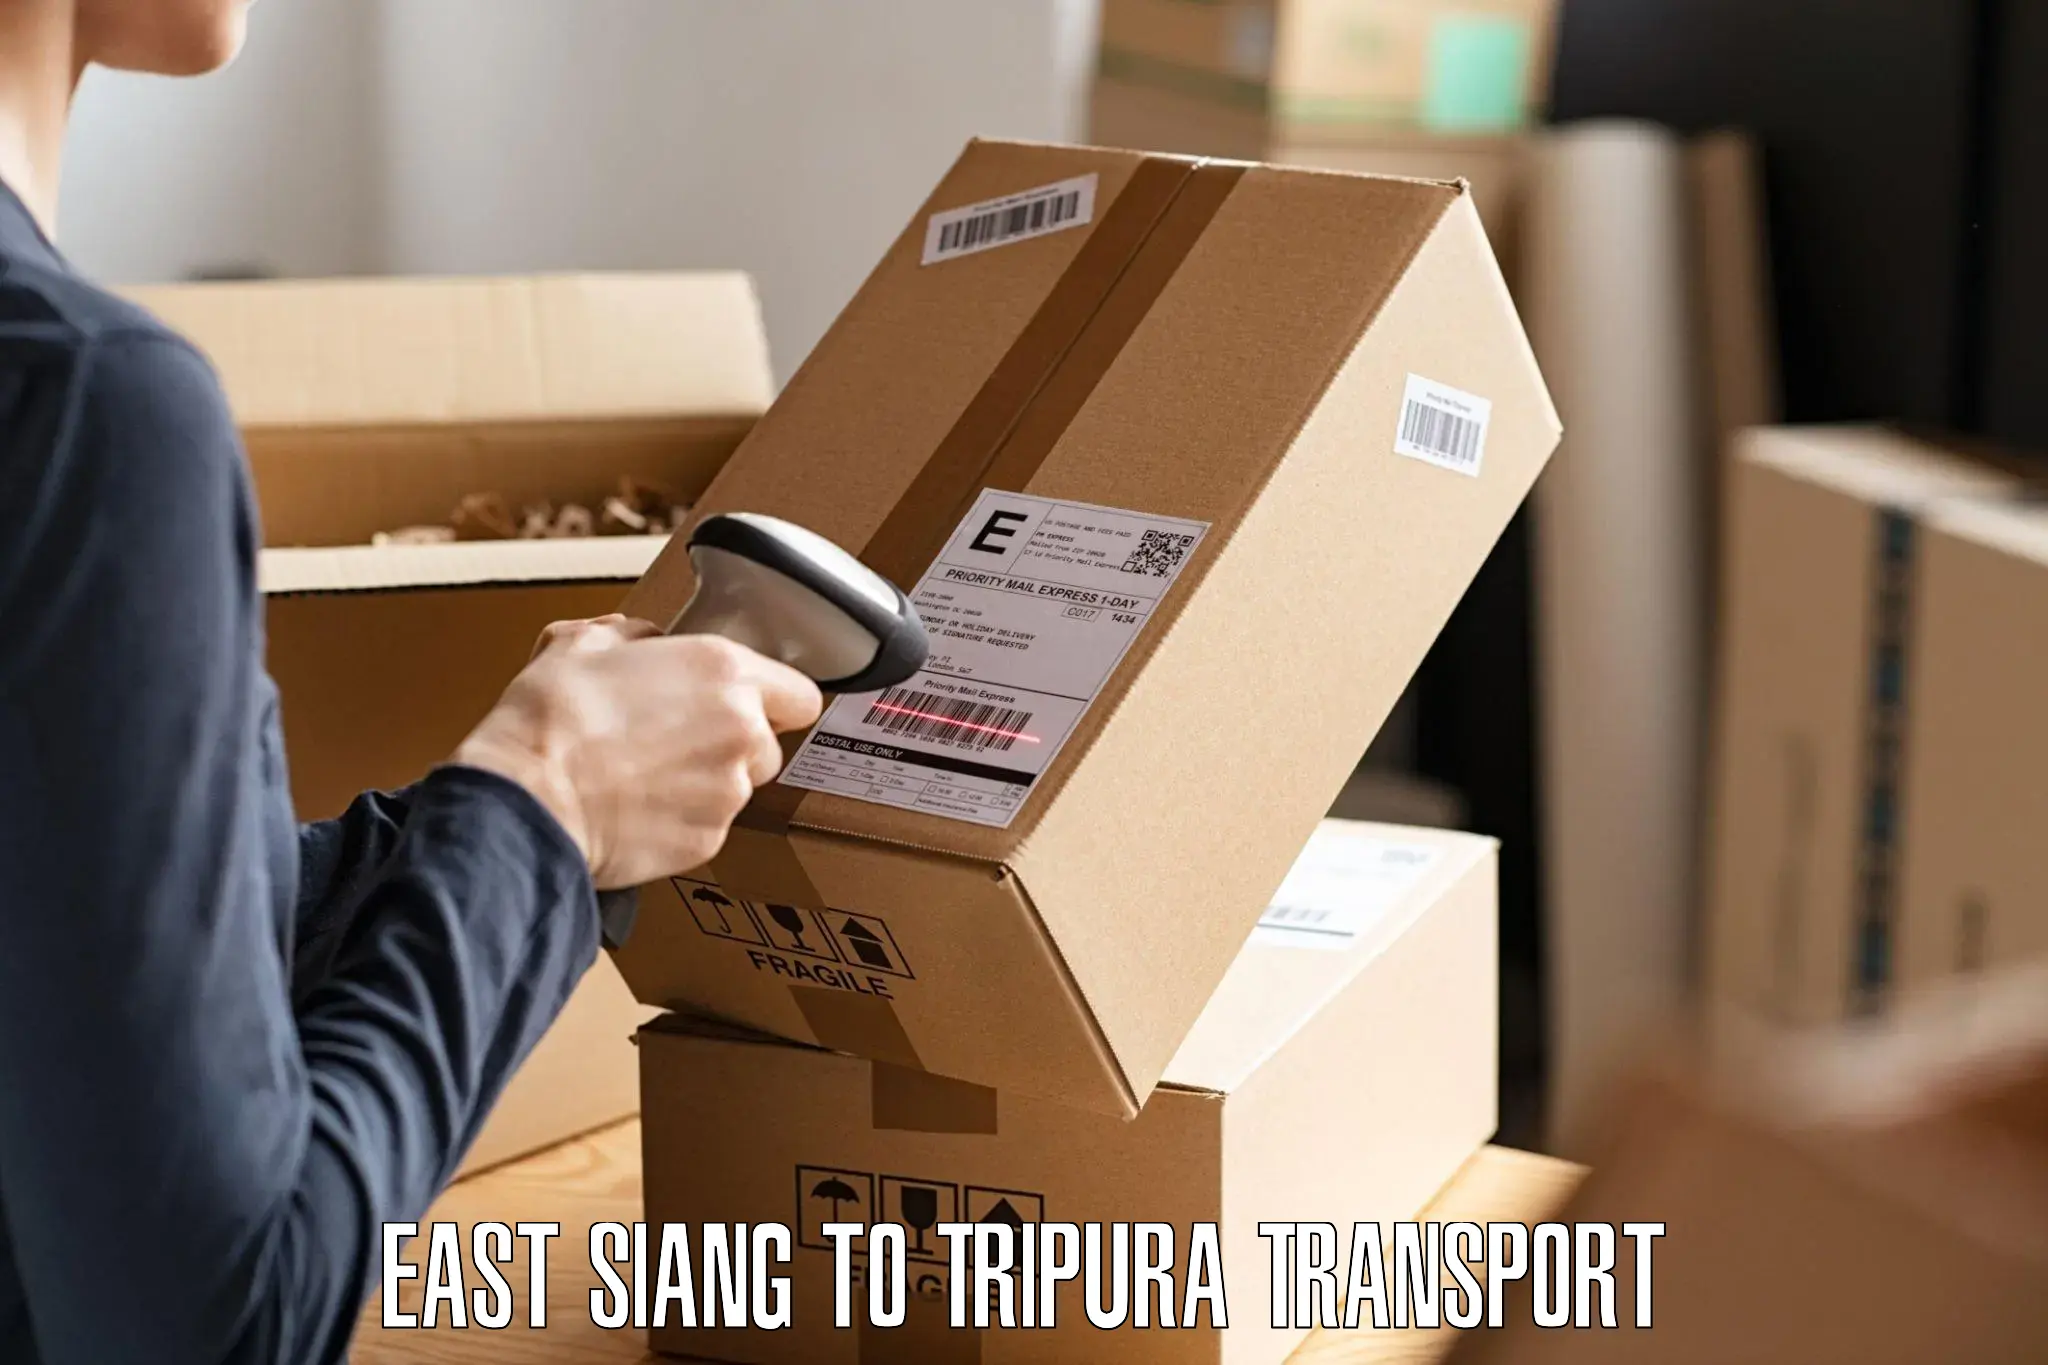 Online transport service East Siang to Udaipur Tripura